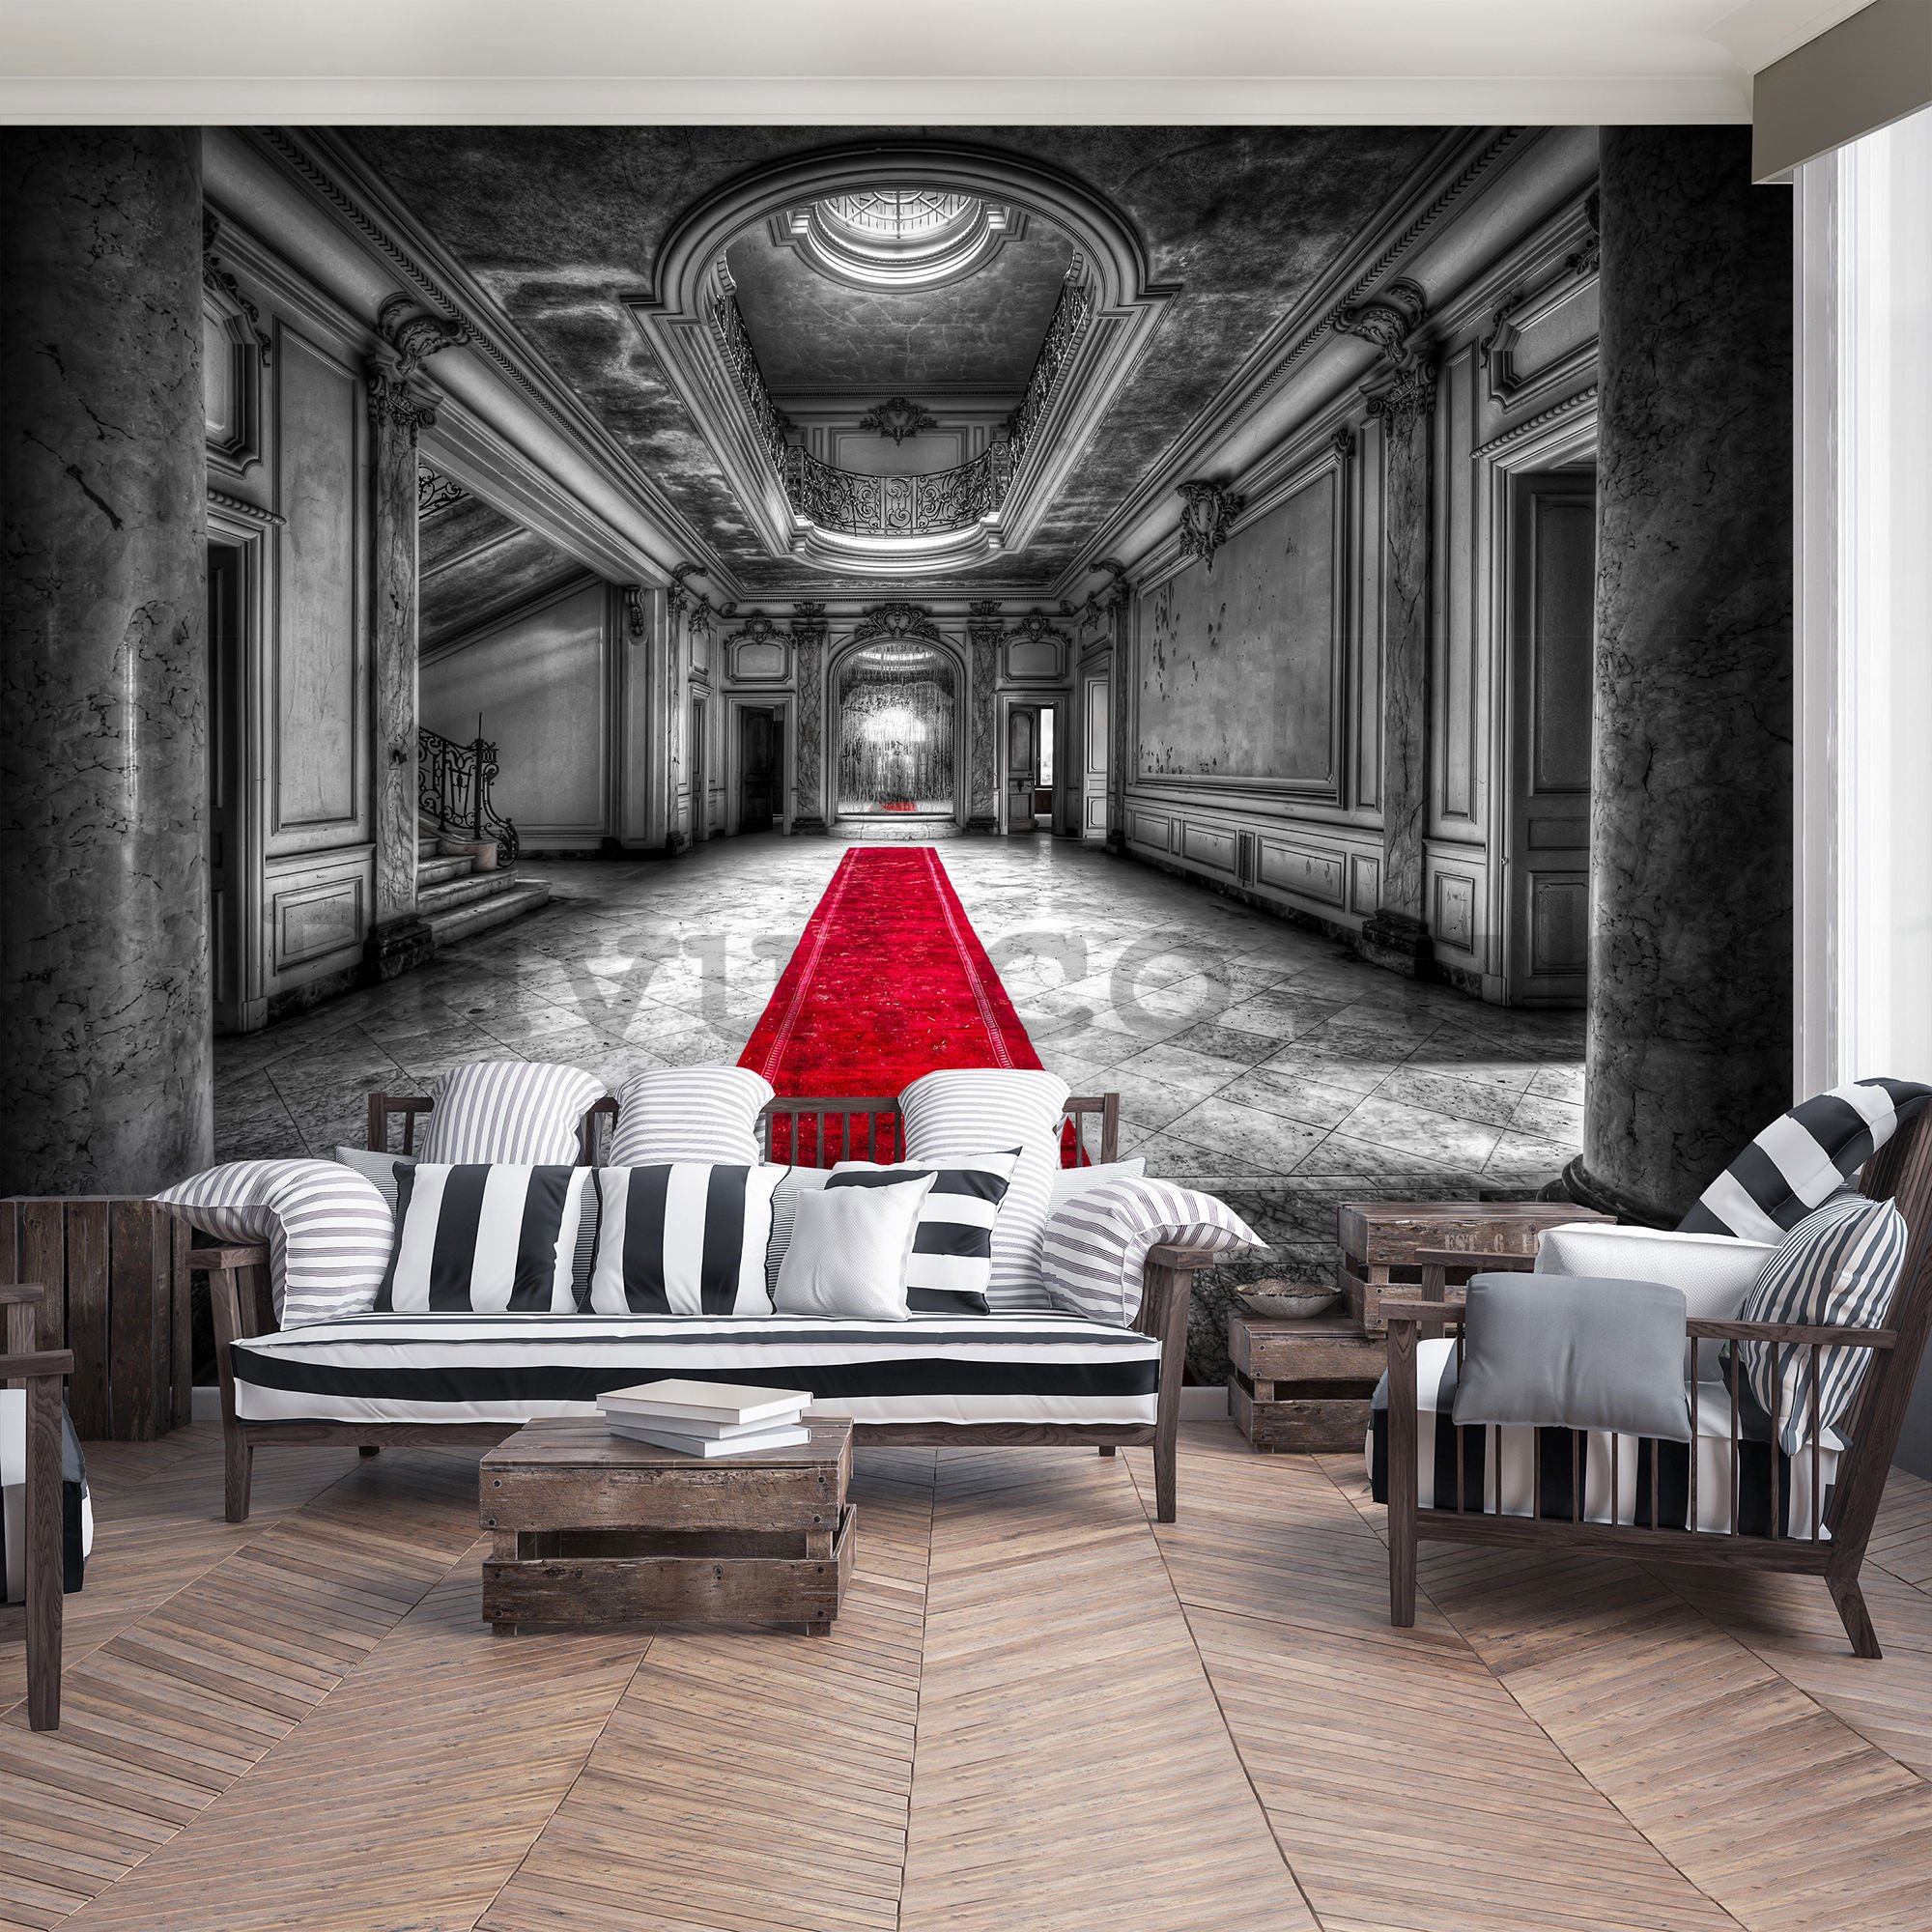 Wall mural: Hallway at the castle - 254x368 cm